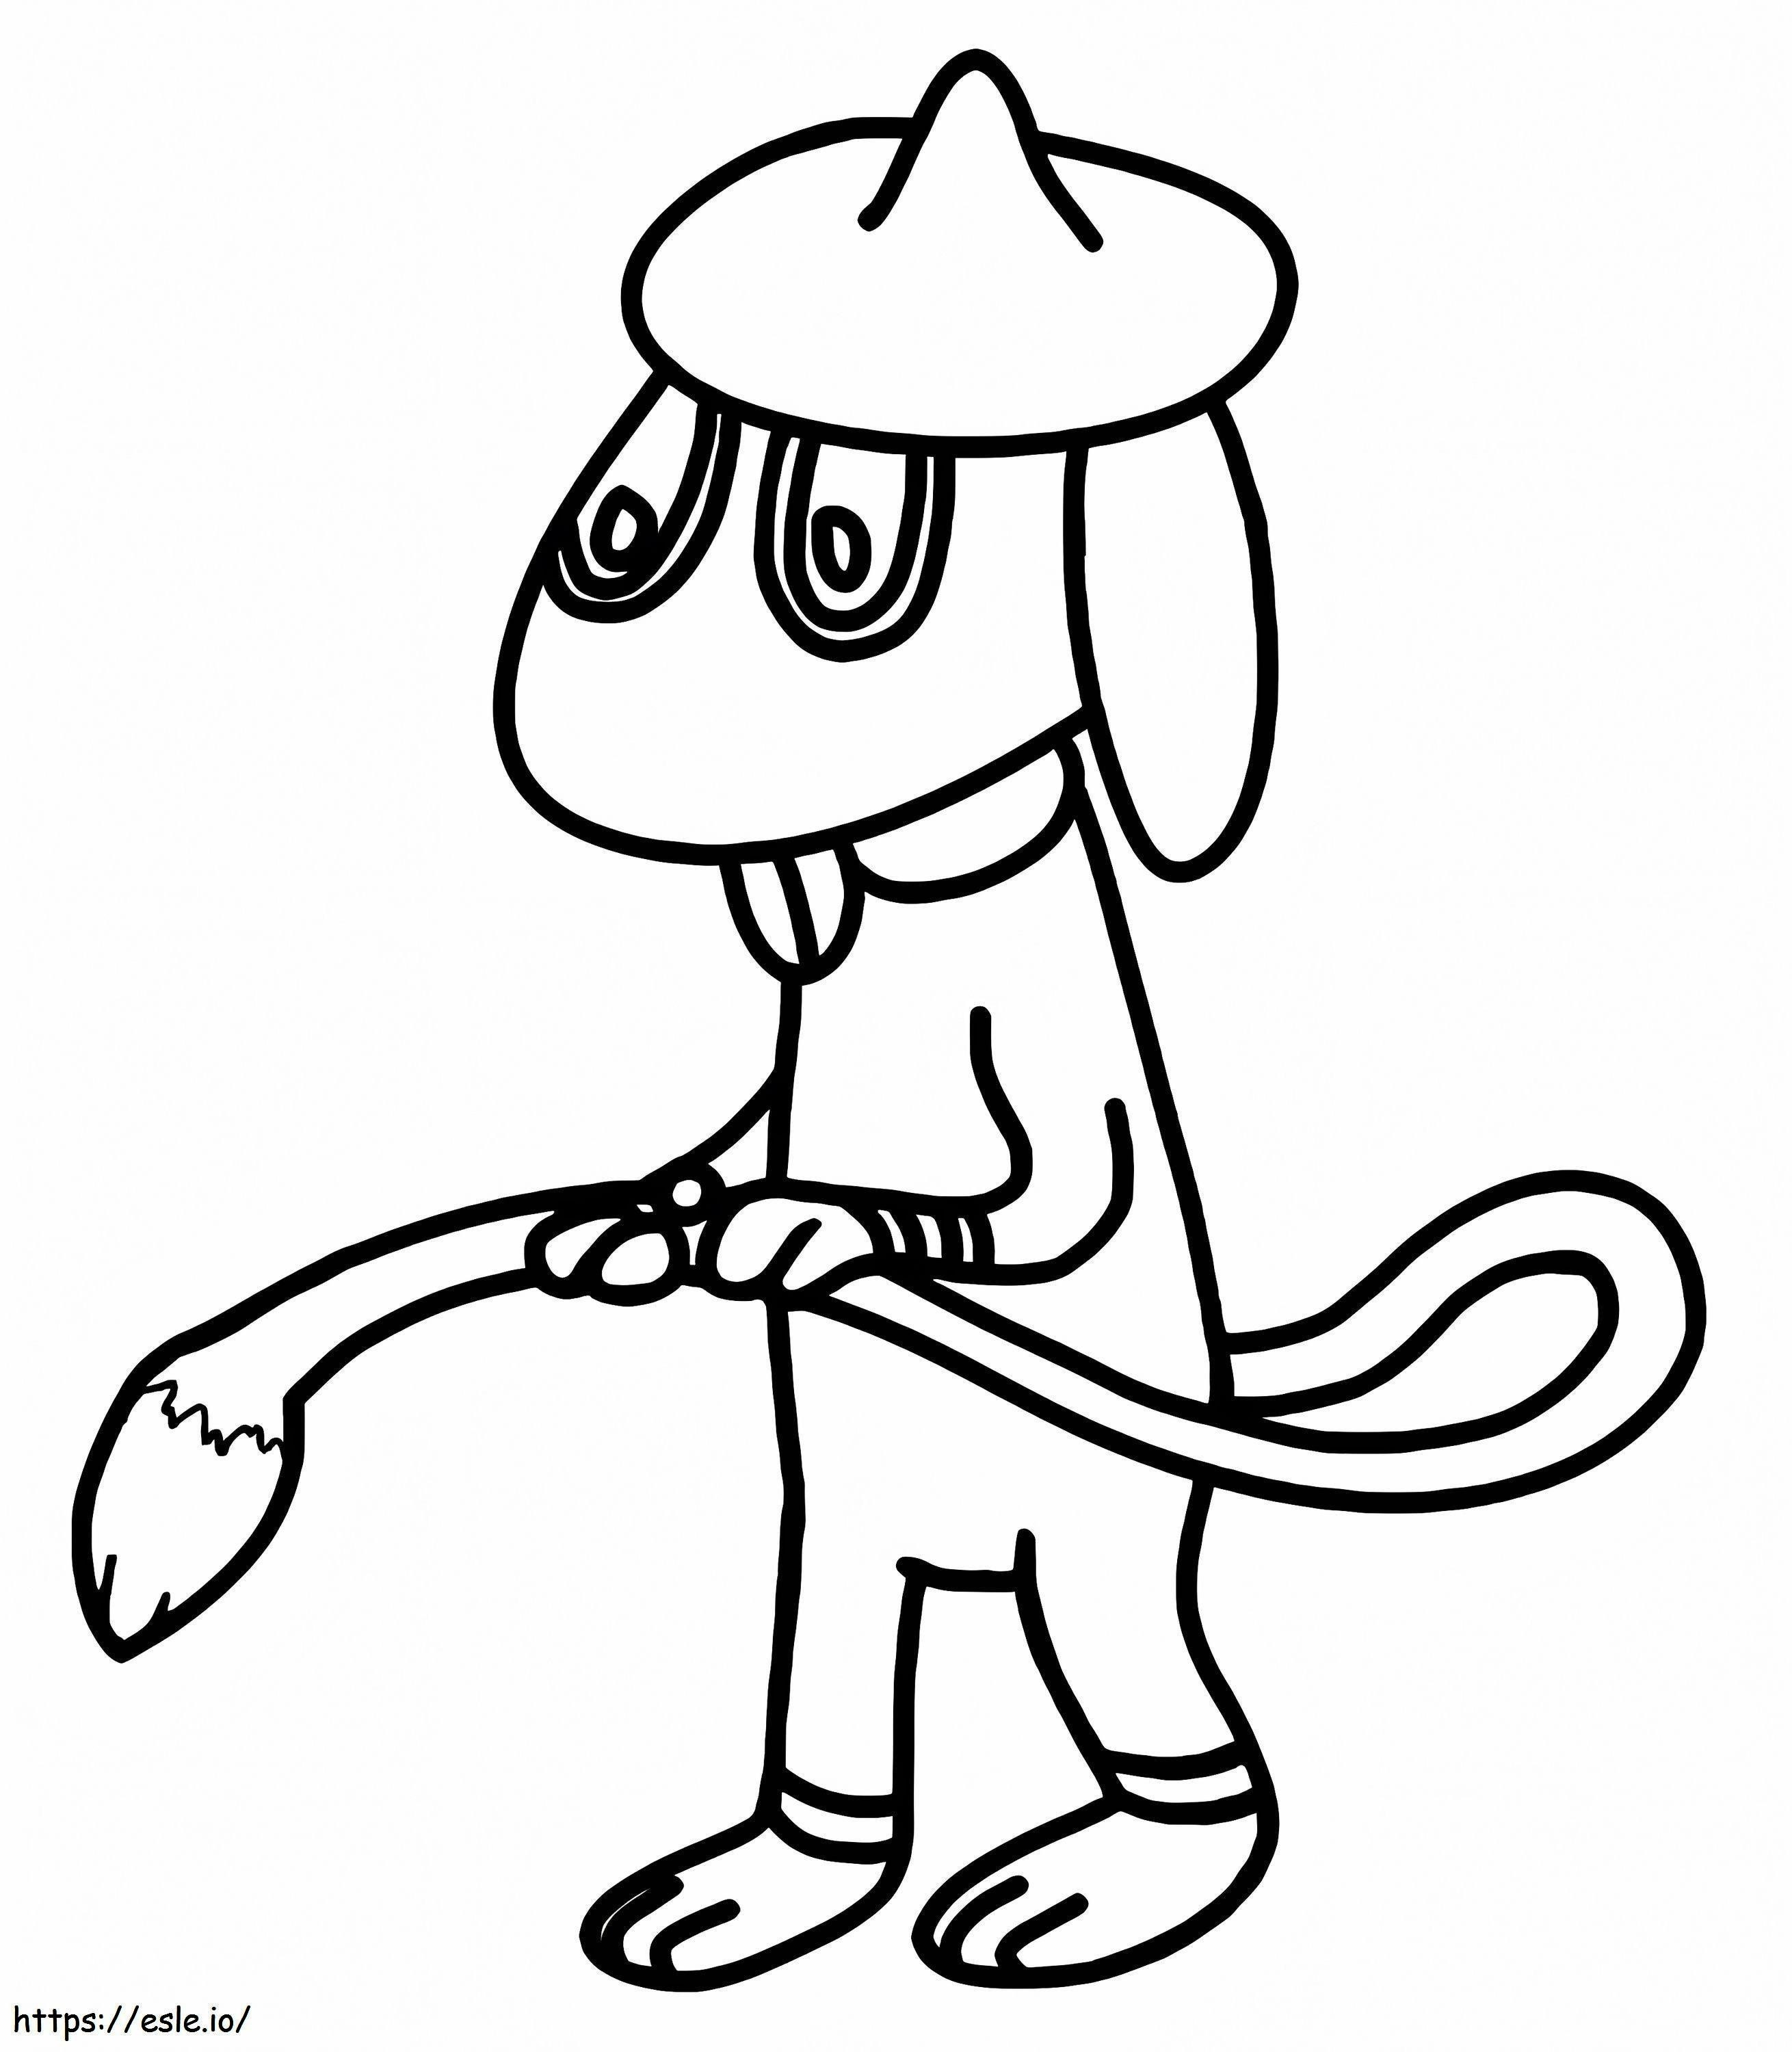 Cute Smeargle coloring page